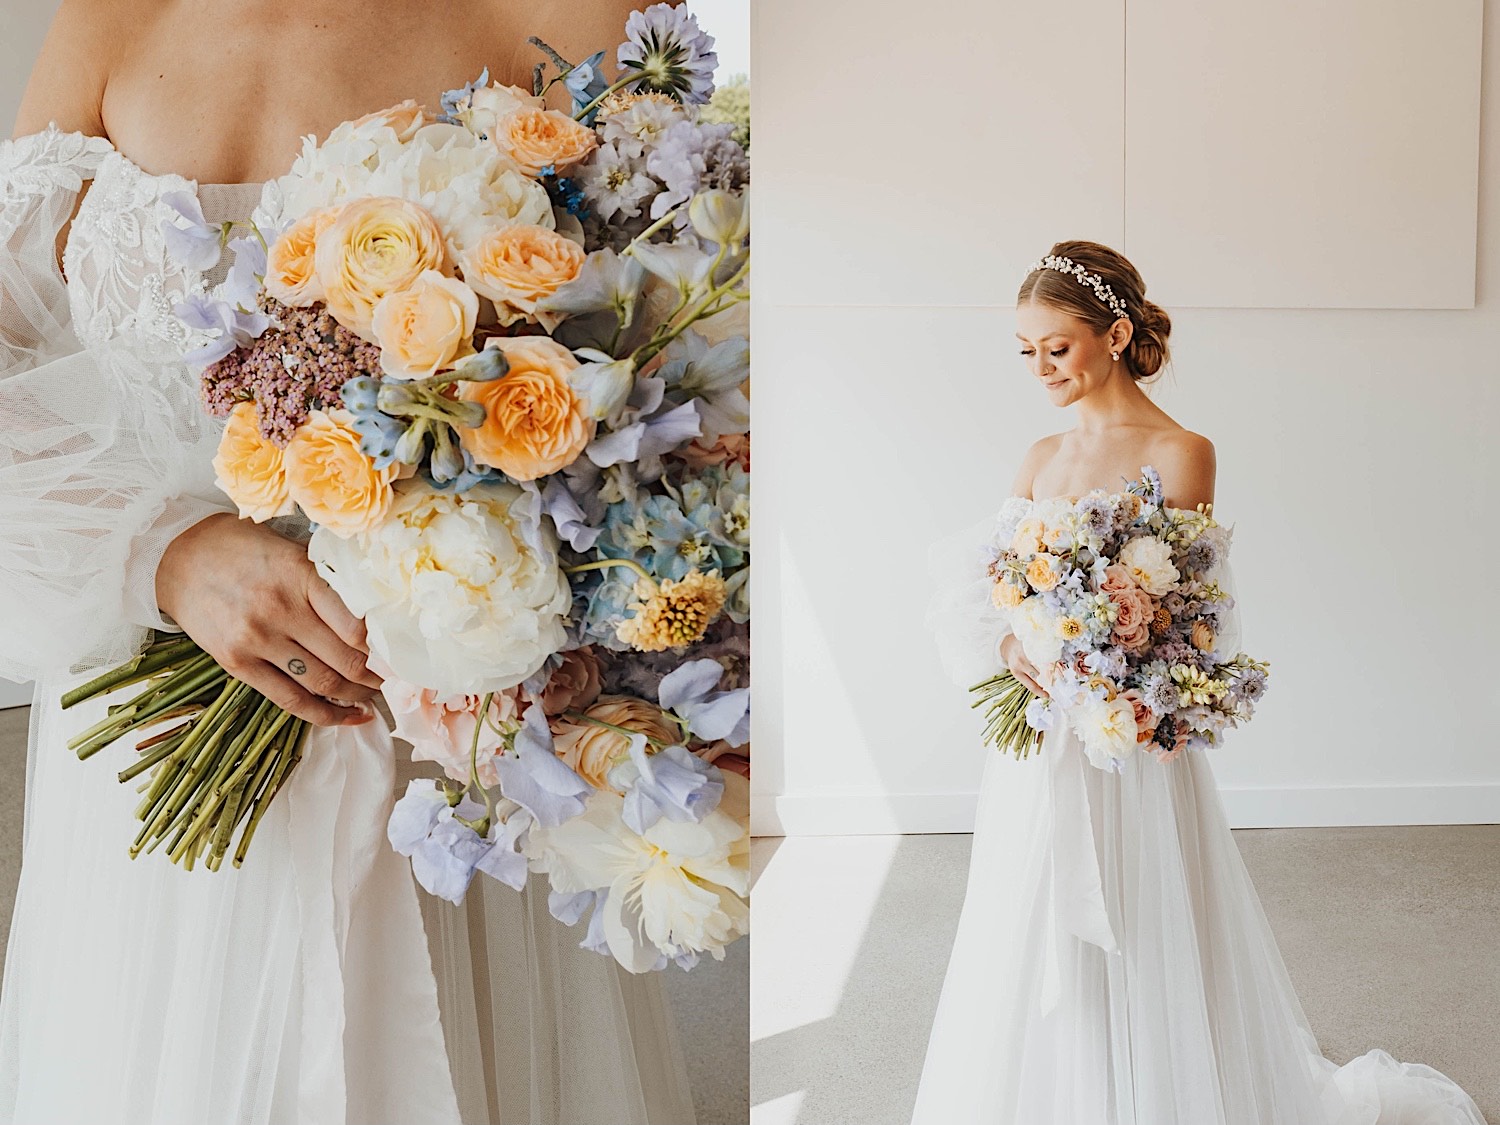 2 photos side by side, the left is a close up of a bride in her wedding dress holding a flower bouquet, the right is a full photo of the same bride holding her bouquet and looking down at the floor